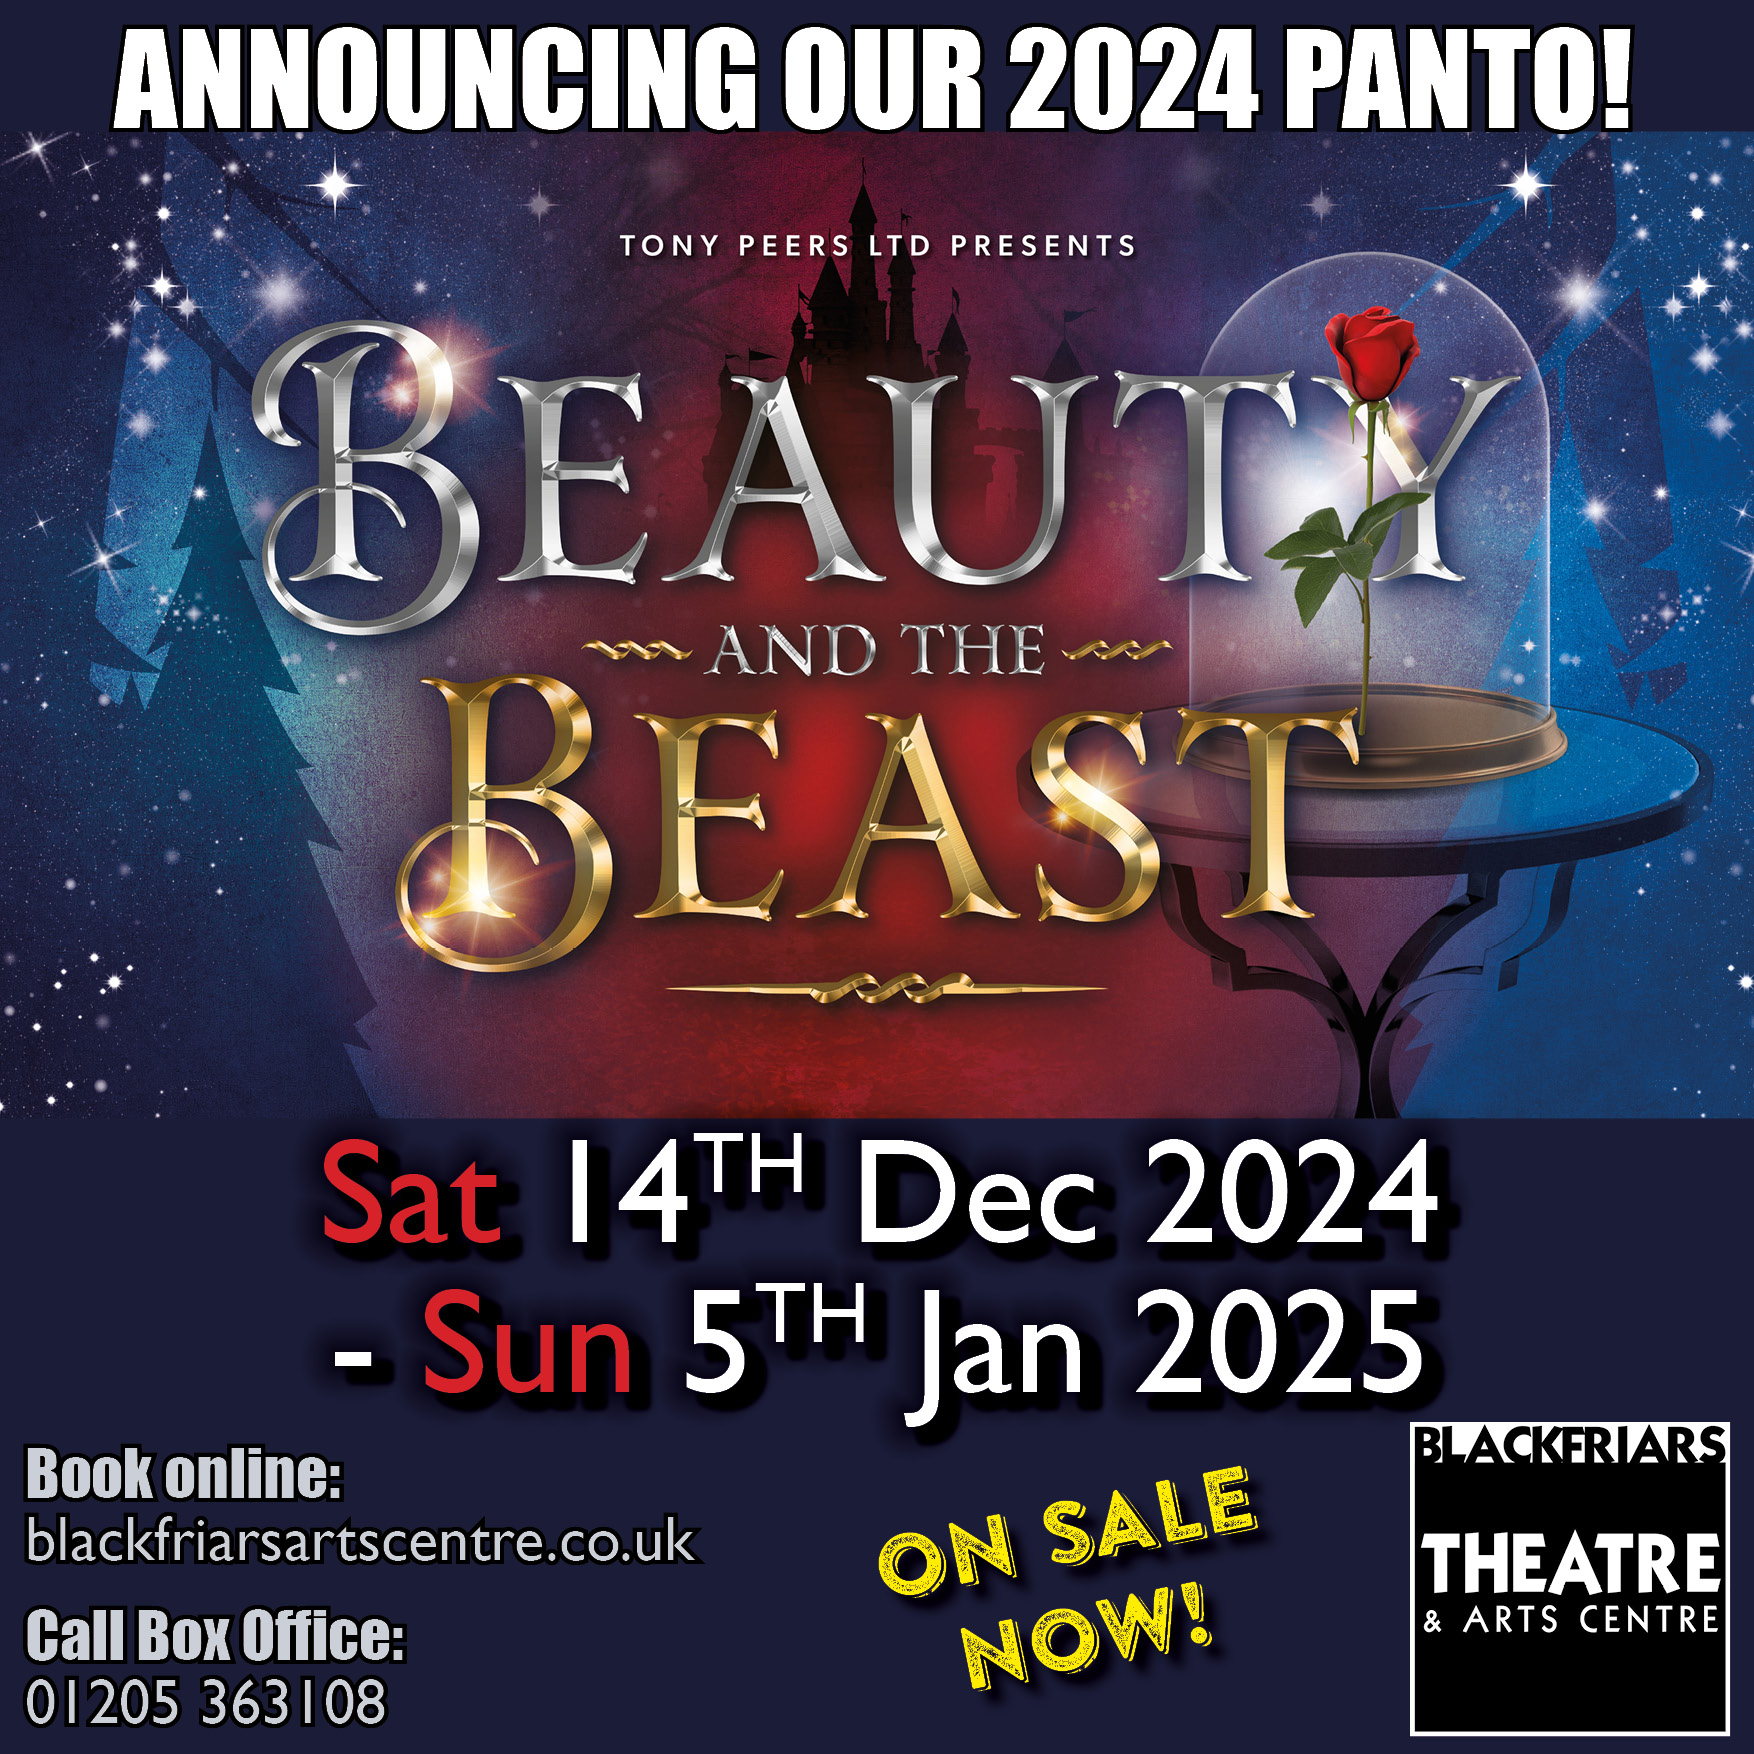 Blackfriars Panto for 2024 is - BEAUTY AND THE BEAST